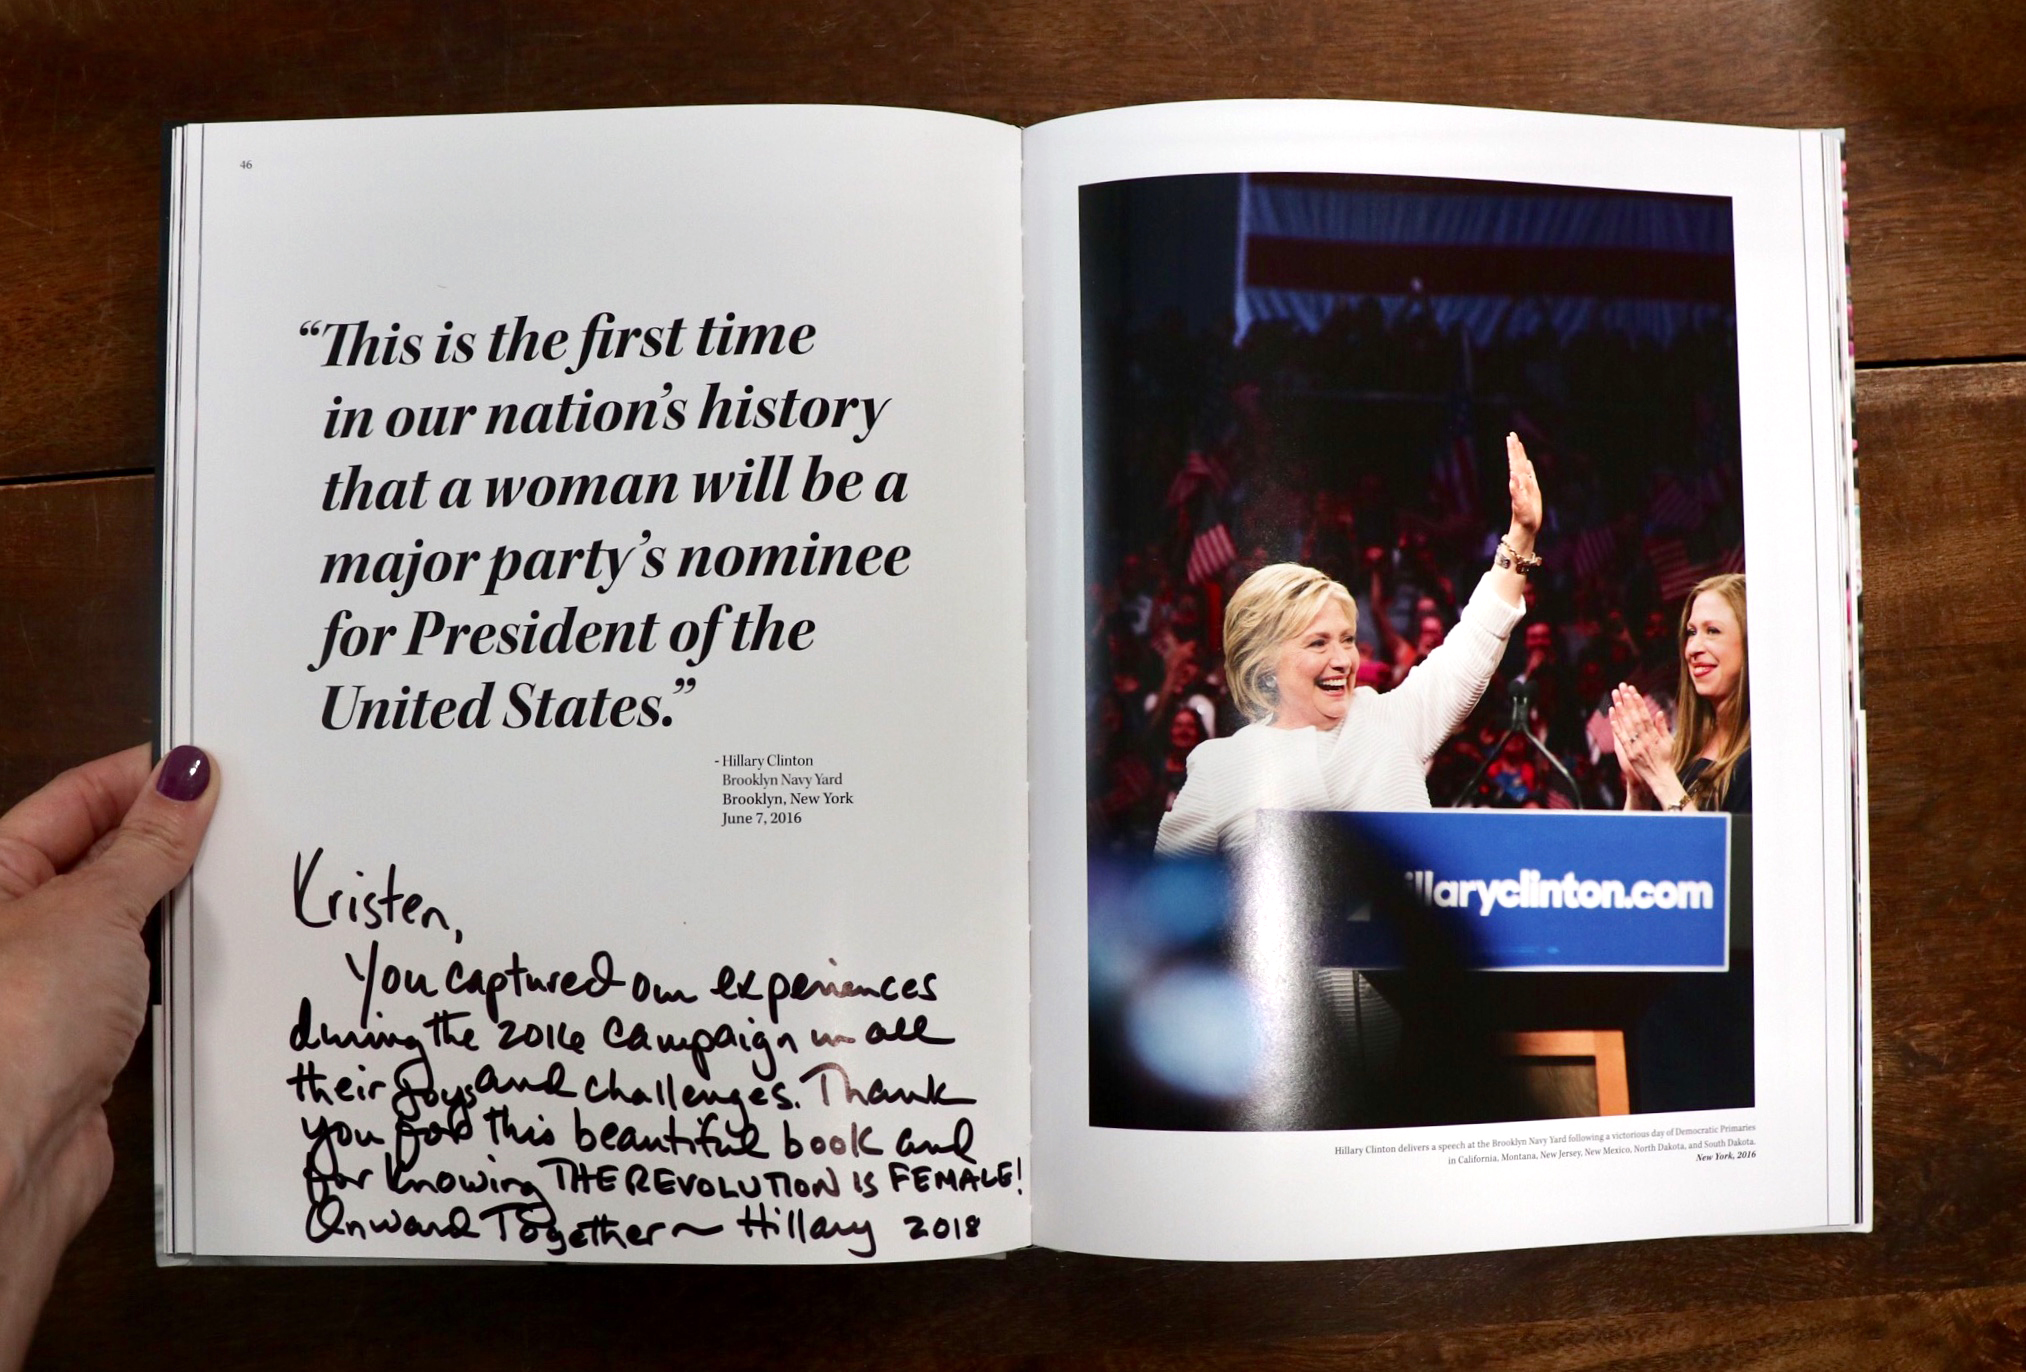 Inspiring words from Hillary Clinton written to Kristen Blush in The Revolution Is Female.